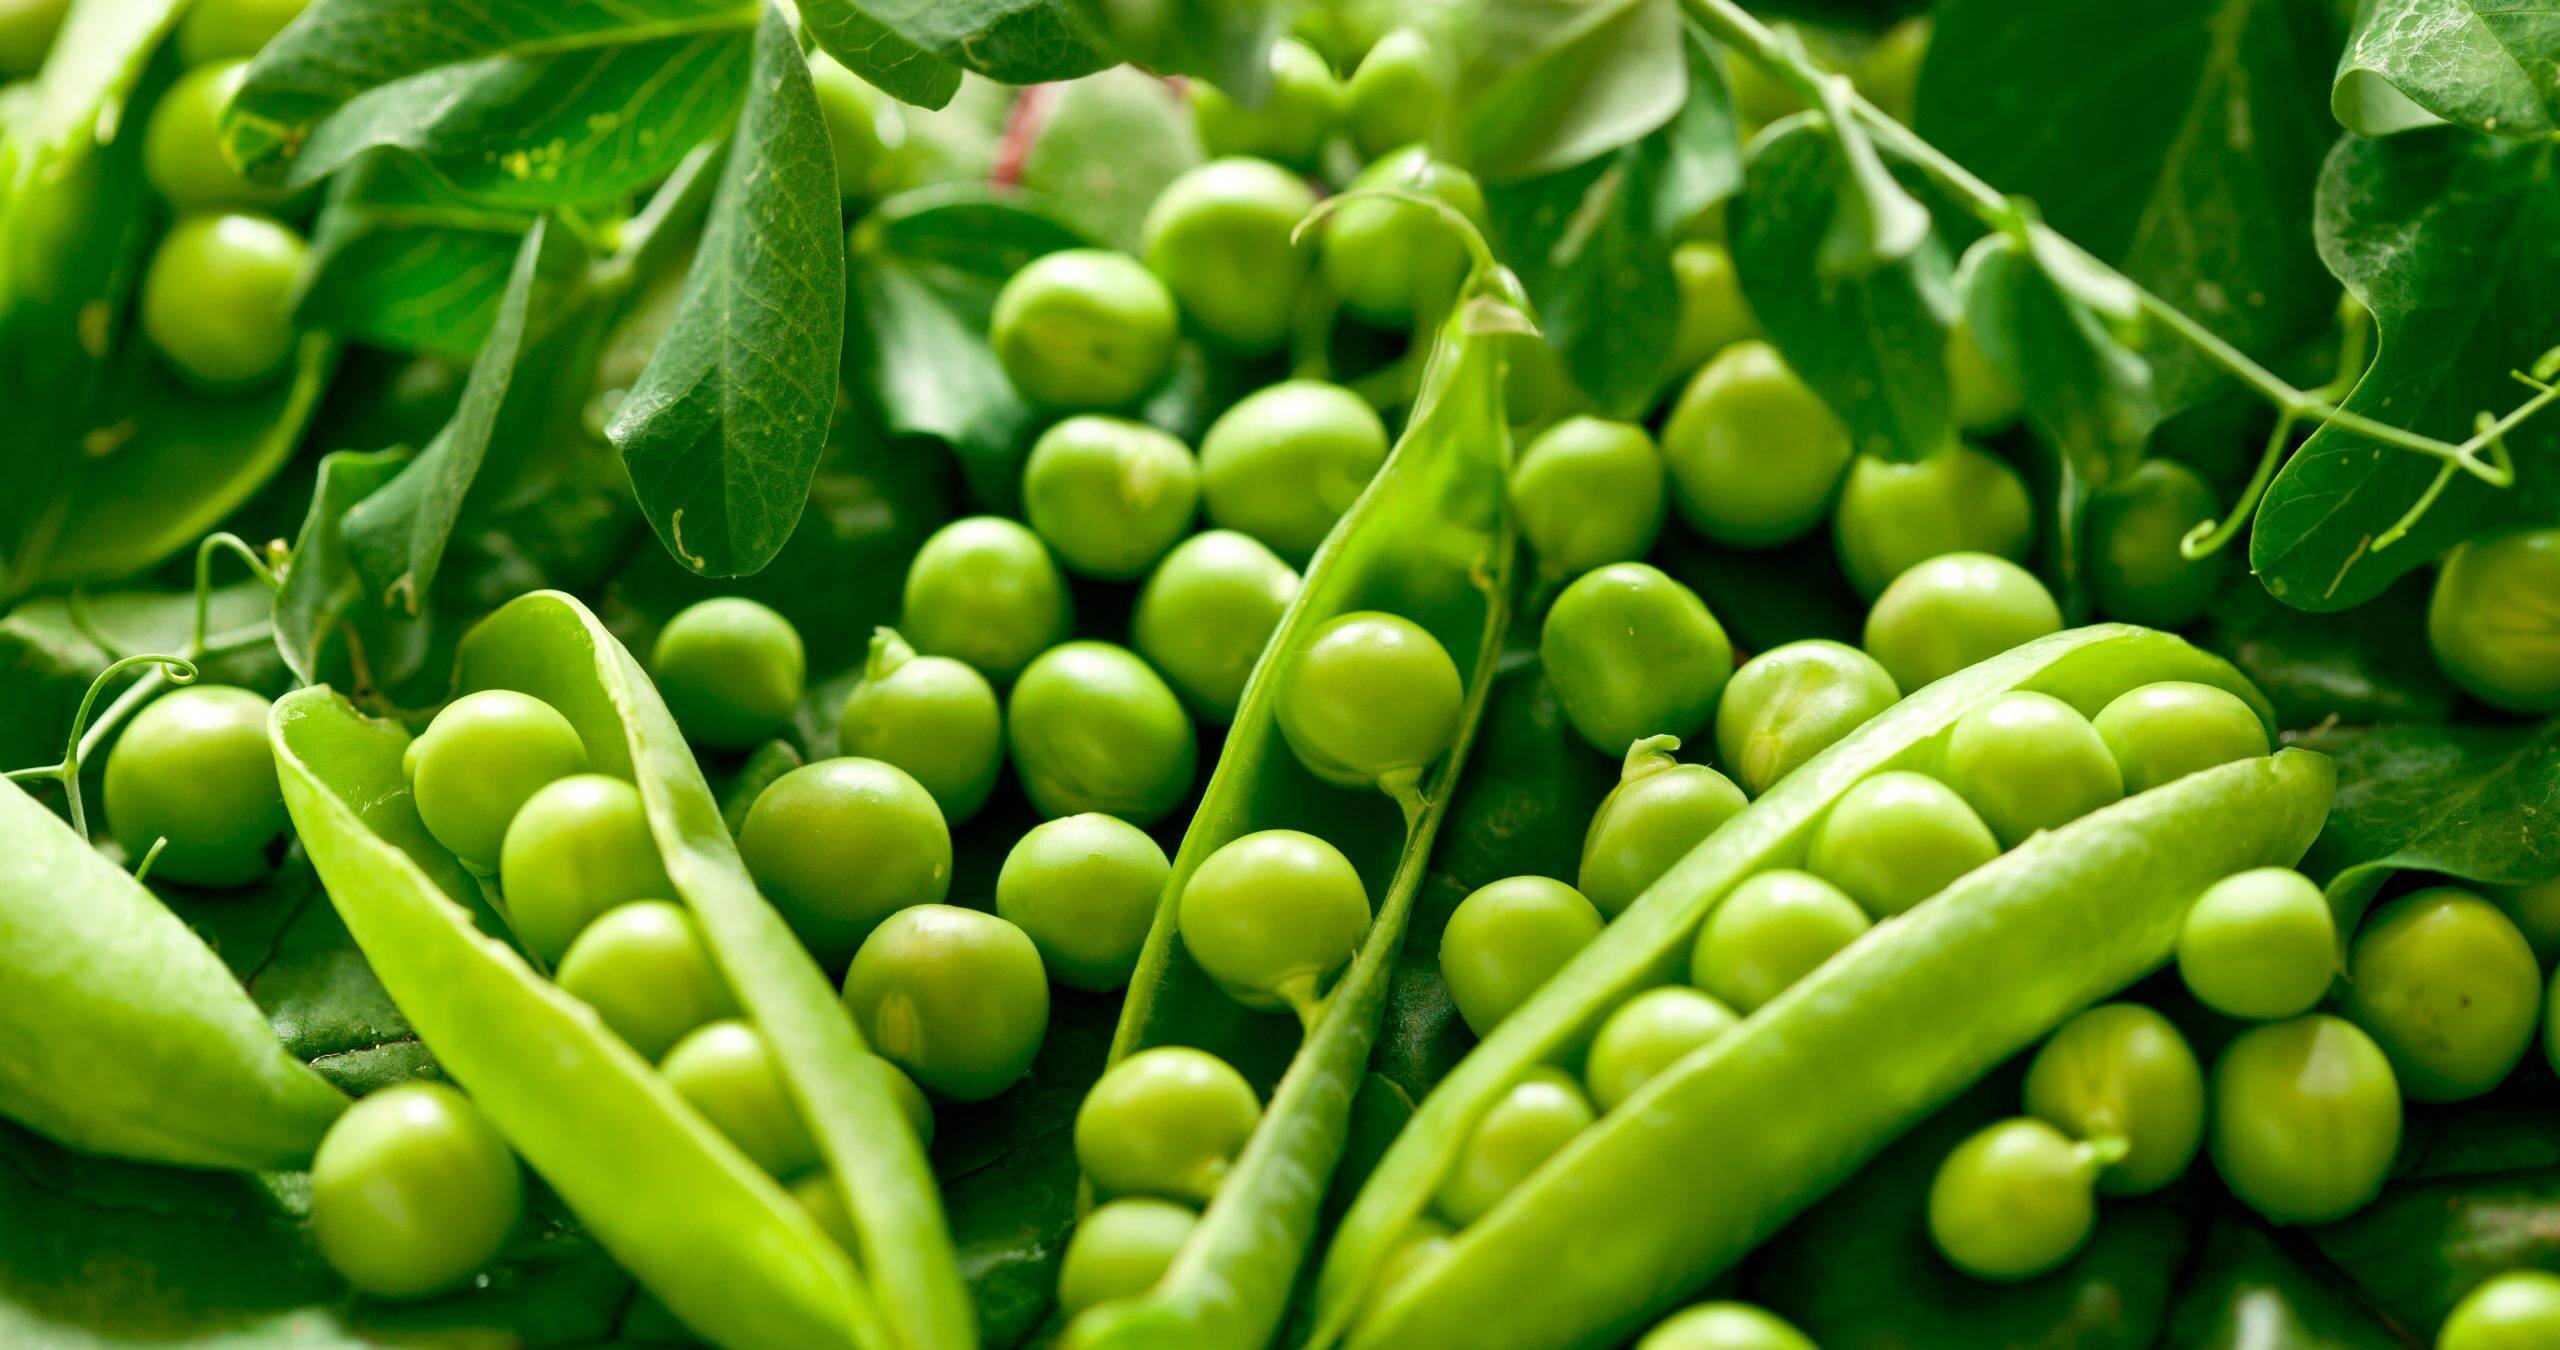 9-facts-about-great-british-pea-week-jul-3rd-to-jul-9th